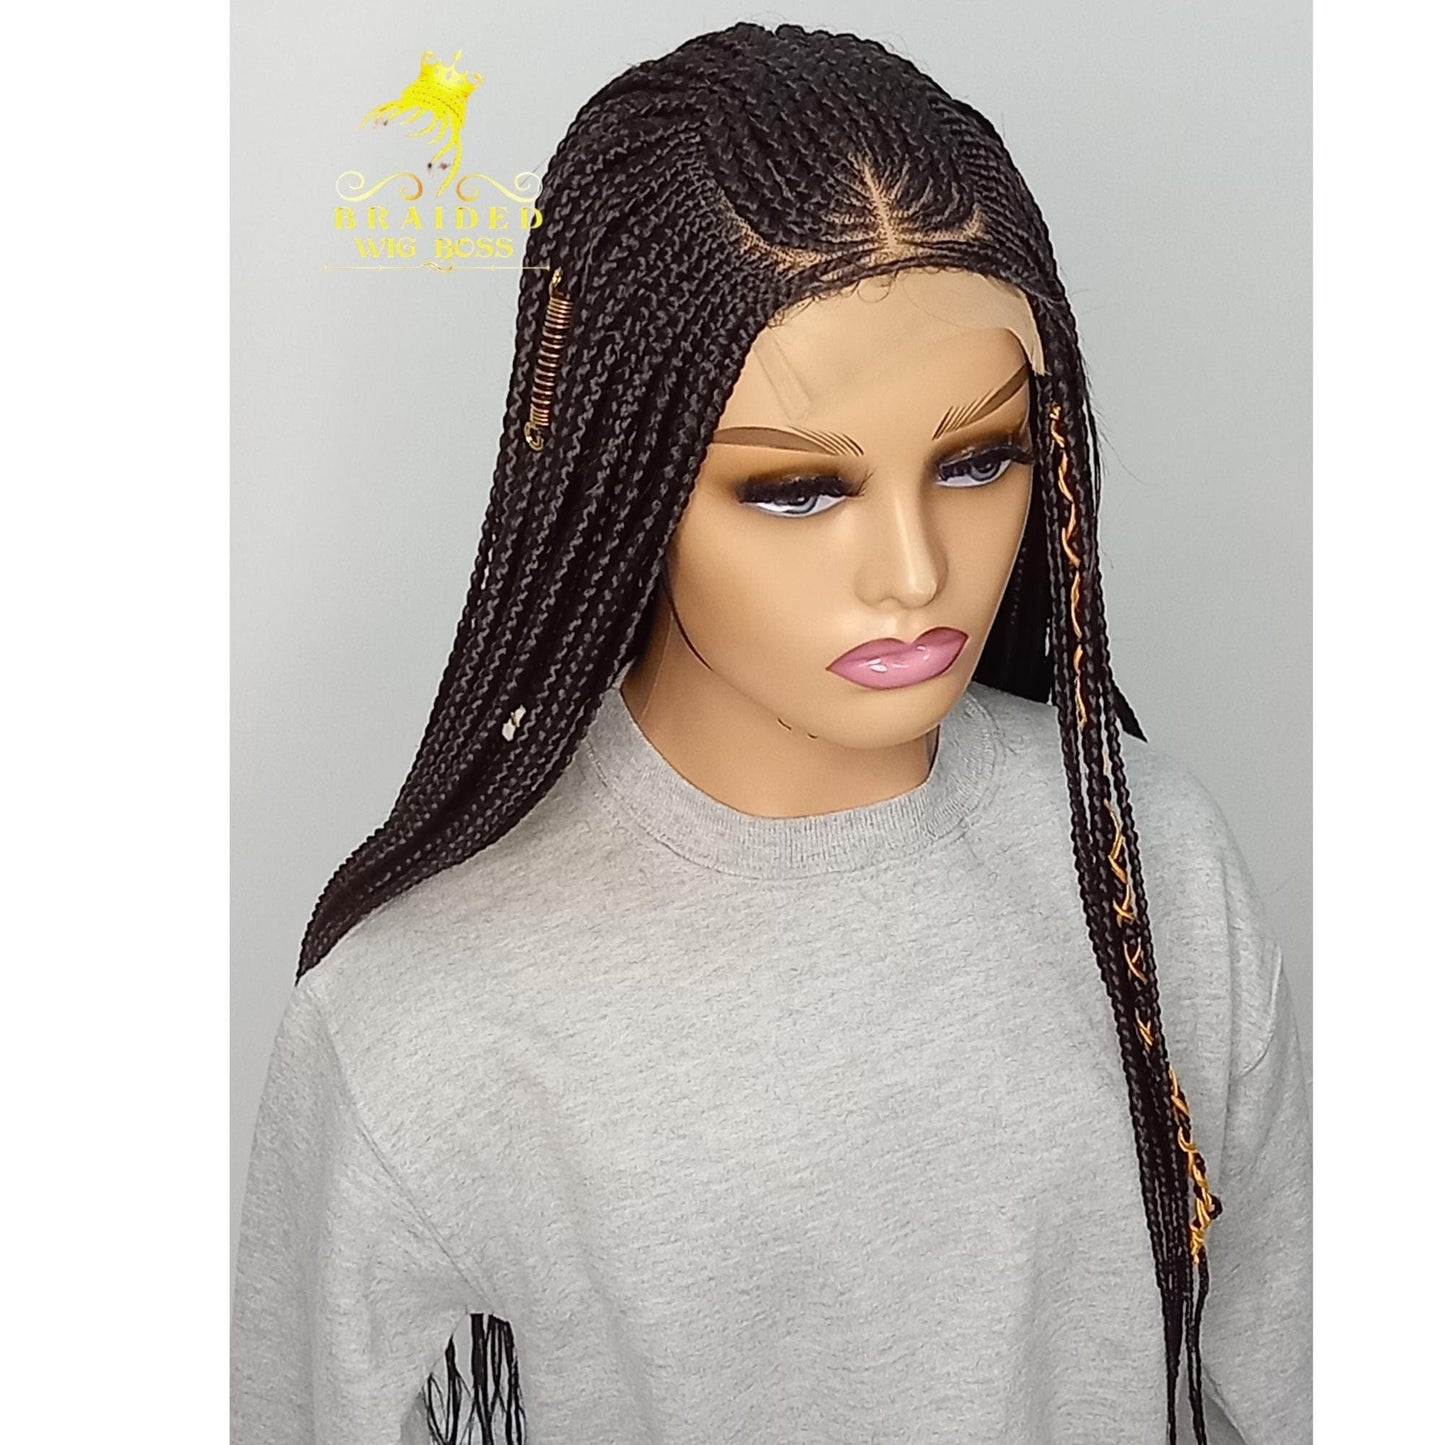 Cornrow Wig on 4x4 Lace Front 30" Long Box Braid Braided Wig for Black Women in Color 2 Handmade Protective Hairstyle Natural Looking Braids